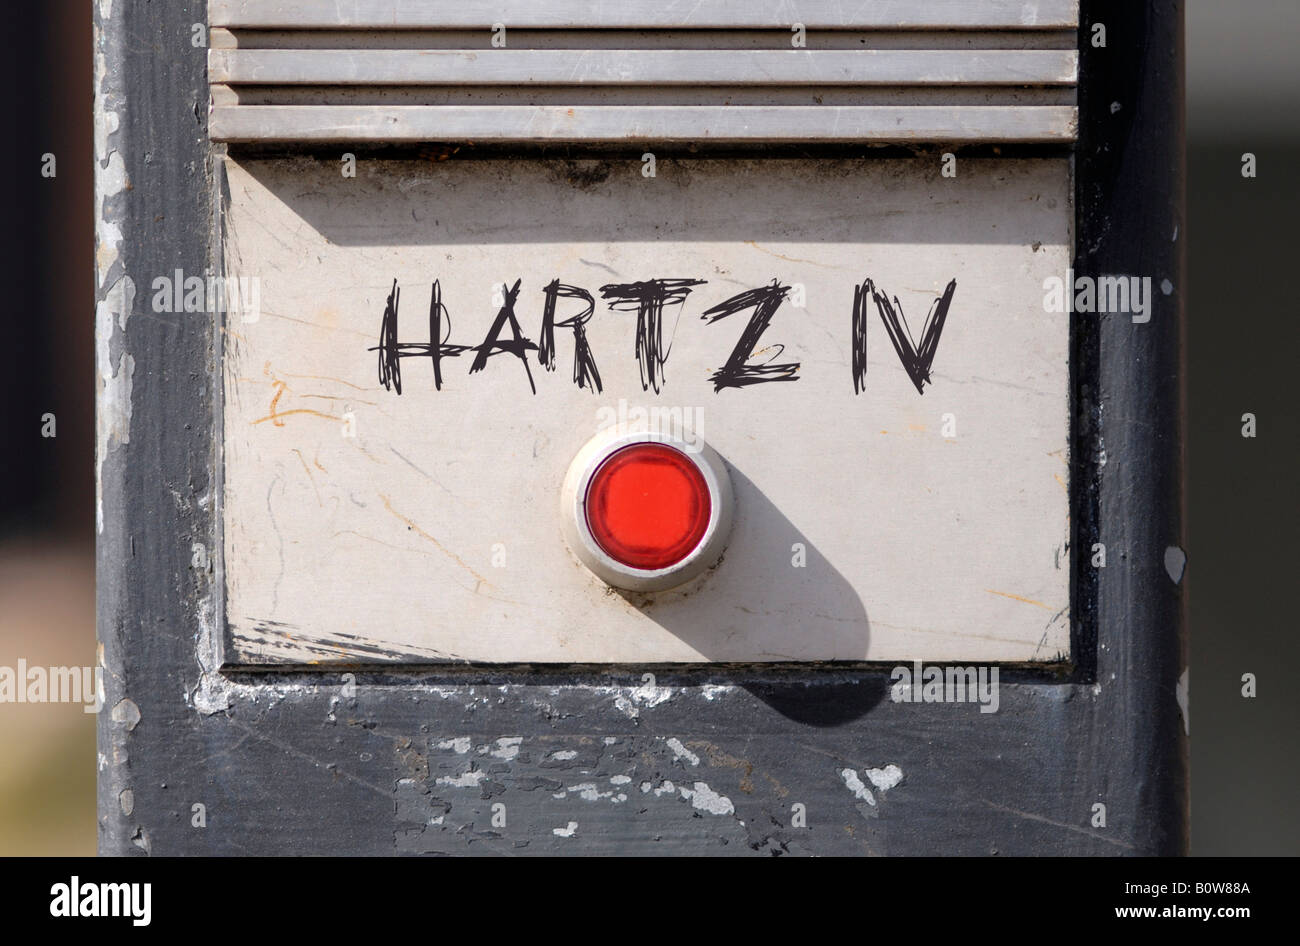 Red doorbell button, 'Hartz IV' in writing Stock Photo